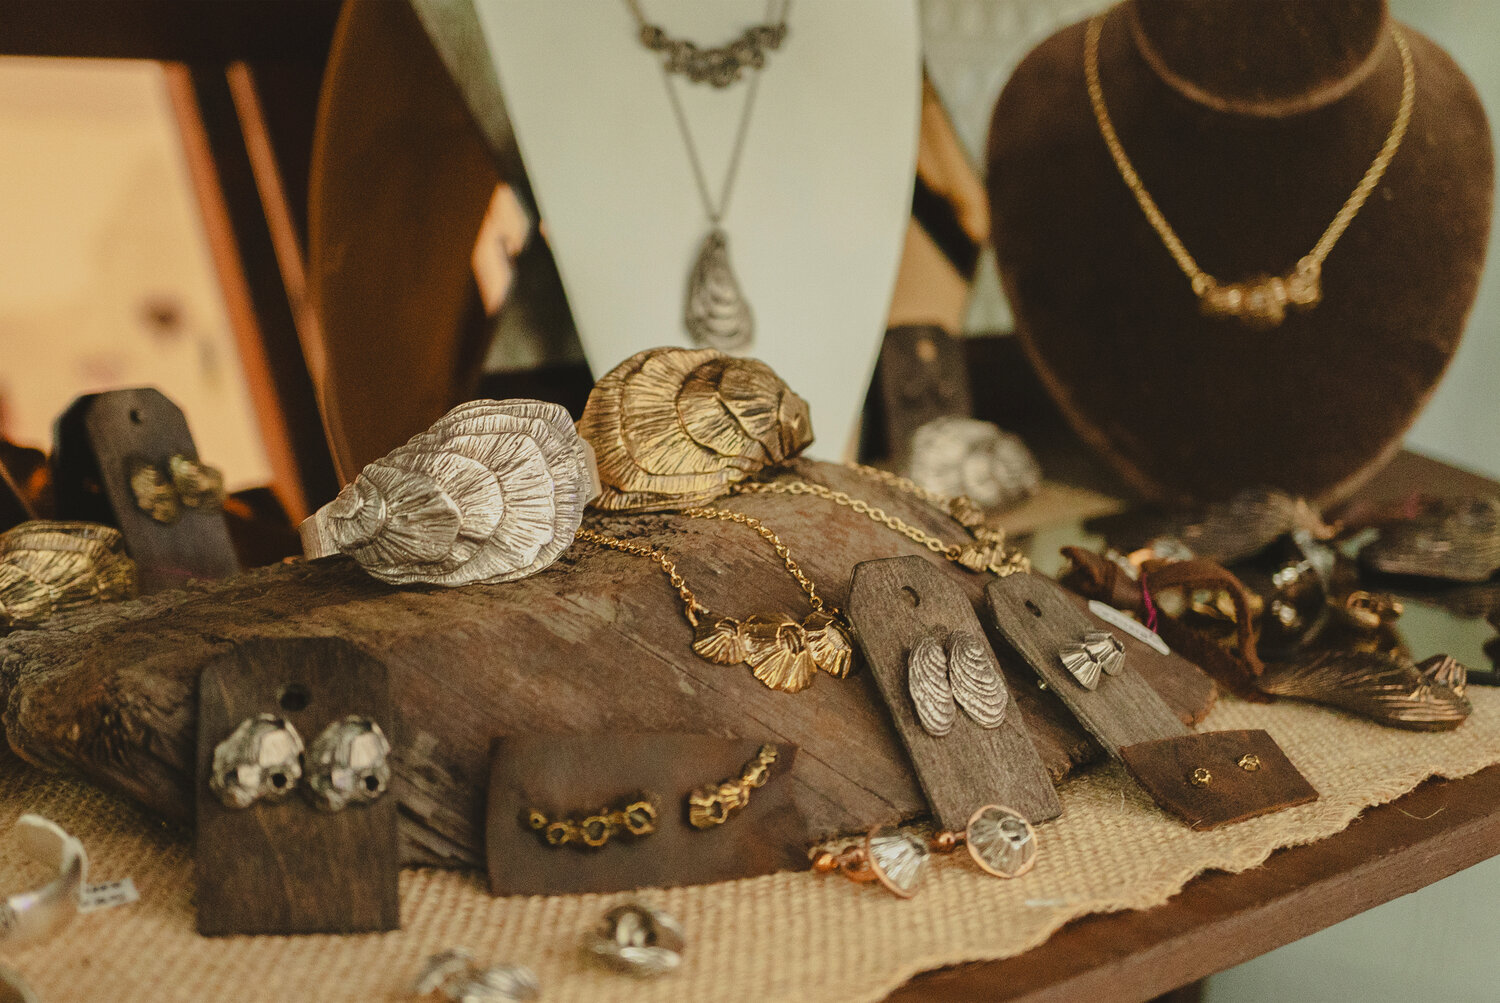 Coastal inspired jewelry at MarMar Boutique